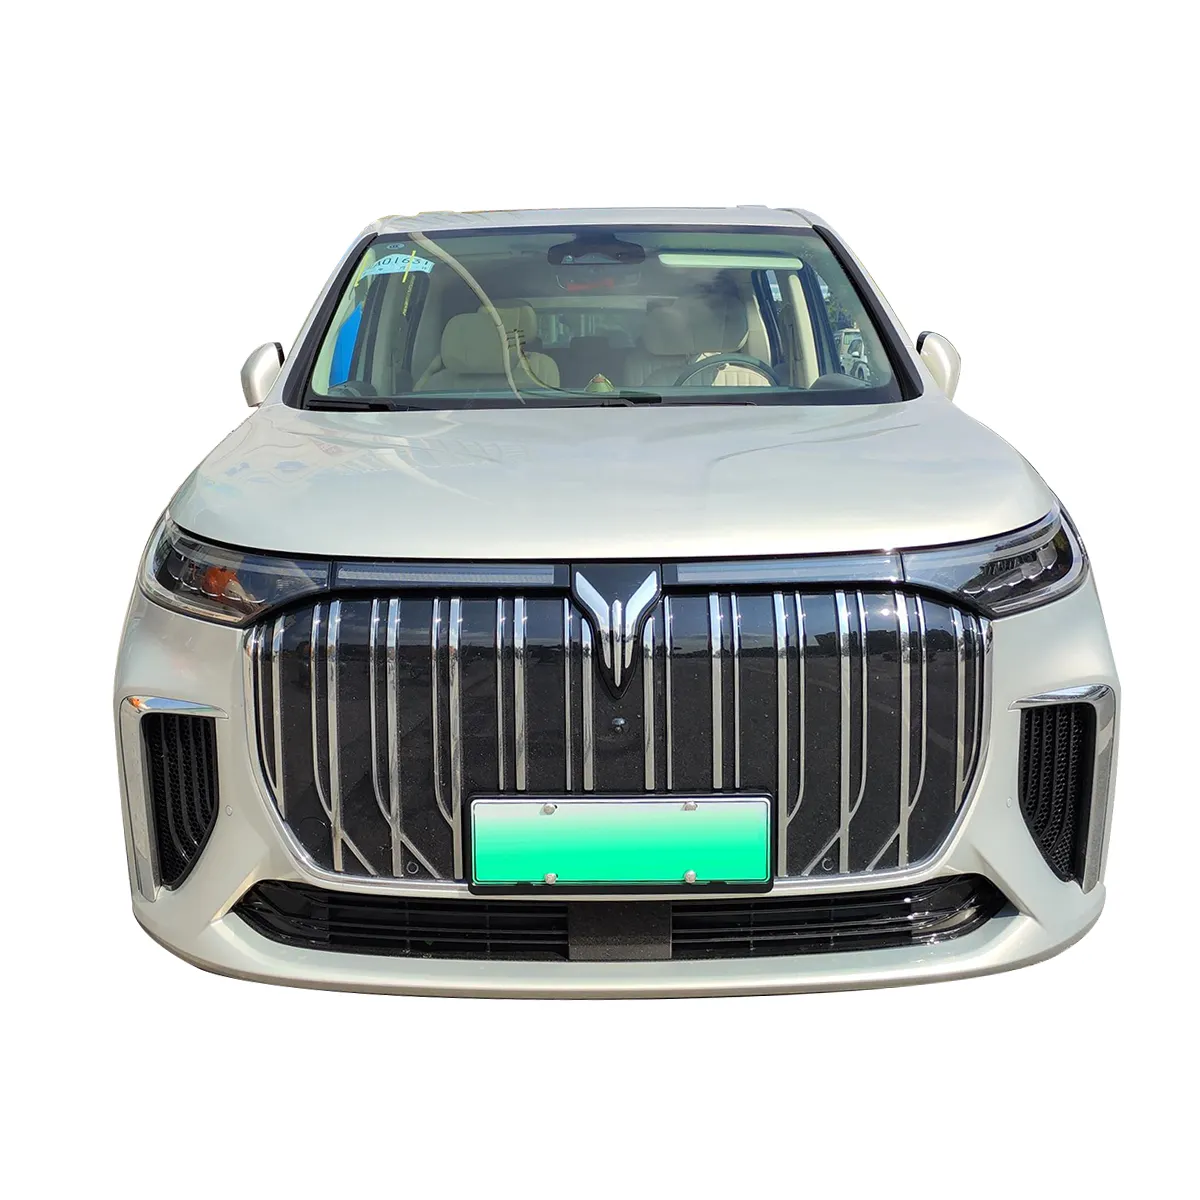 2022 VOYAH 320kW electric car 4x4 dual motor driven used vehicle Lithium new energy vehicles